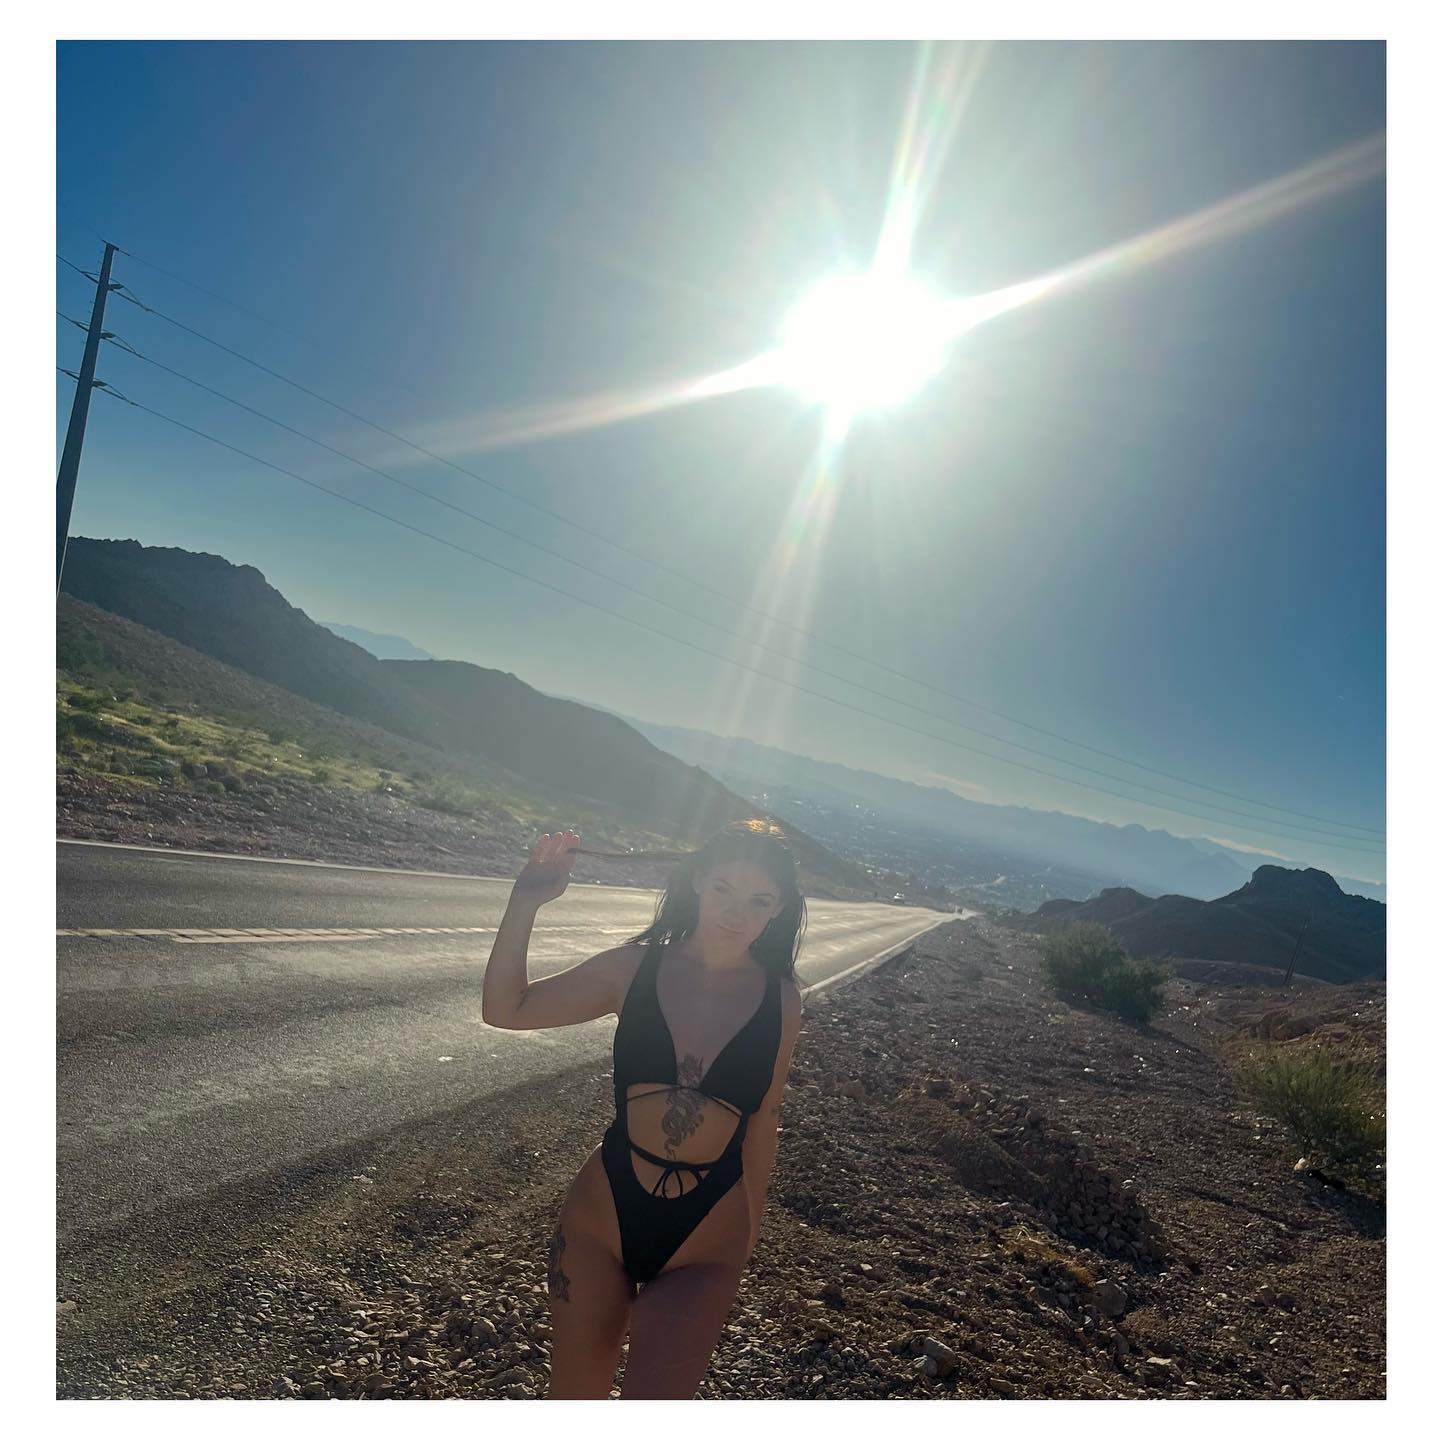 Growing and Glowing ✨

.
.
.
.
#viral #explore #explorepage #fyp #baddie #outfit #ootd #repost #exploremore #model #2023 #modeling #clickthelink #linkinbio #newintown
#lasvegas #vegas #nevada #naturephotography #outdoors #sunset #mountains